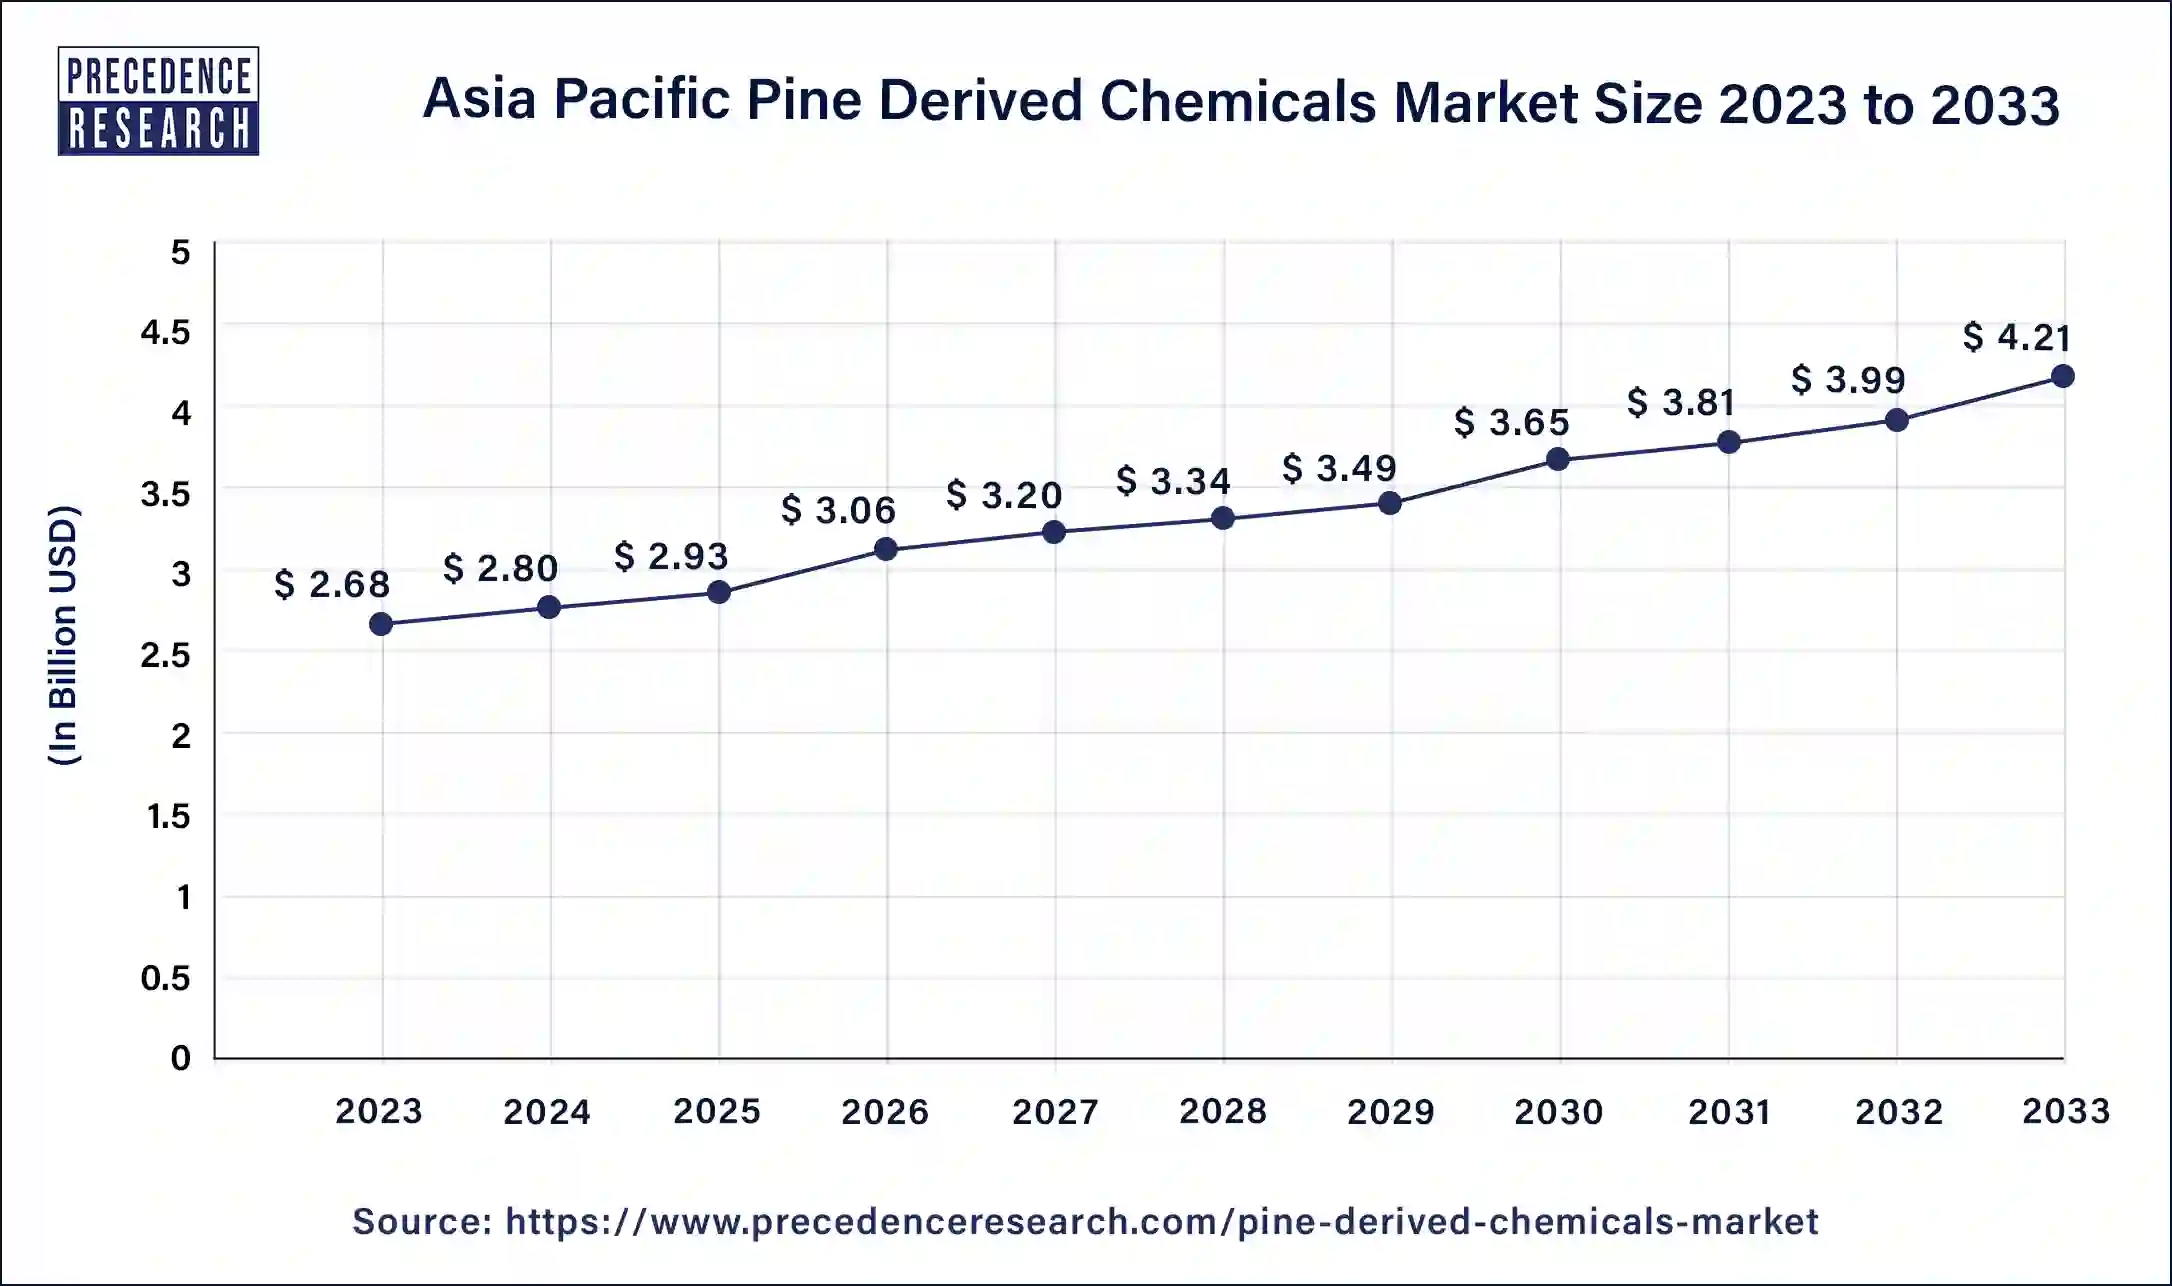 Asia Pacific Pine Derived Chemicals Market Size 2024 to 2033